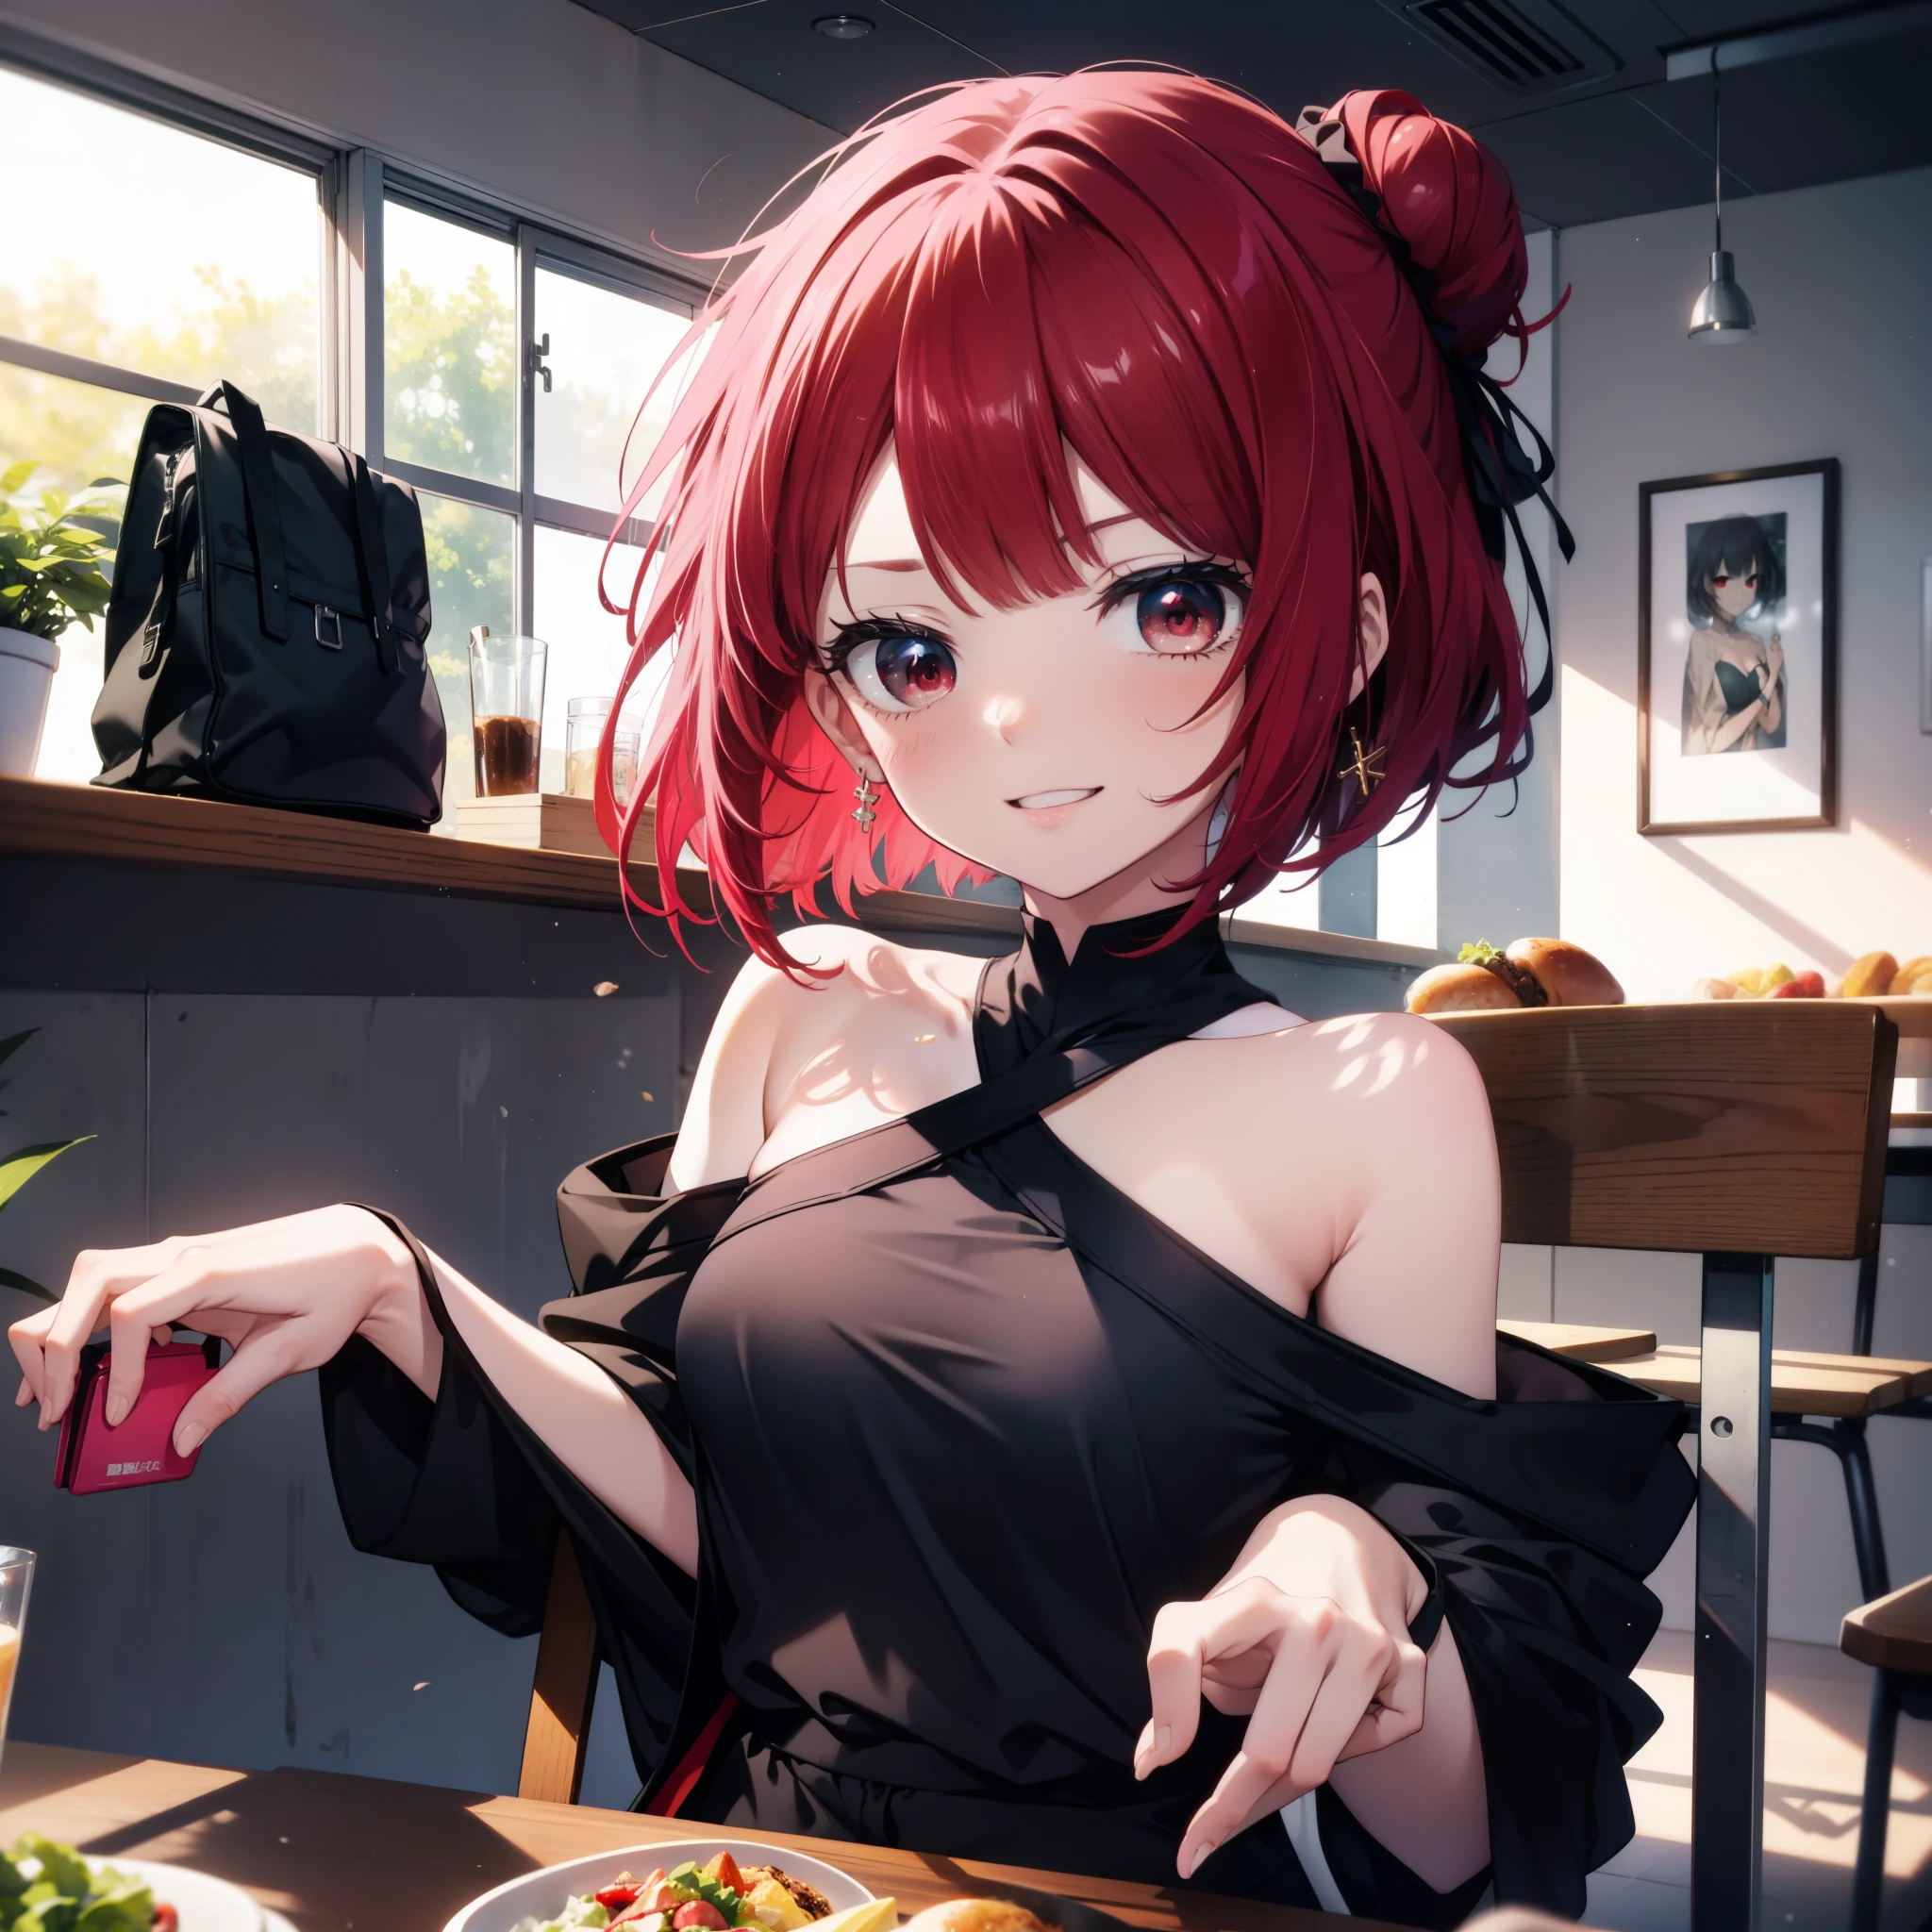 Arima etc.., Arima Kana, (Red eyes:1.5), Red Hair,Short Hair,Bob Hair,happy smile, smile, Open your mouth,Hair Bun, single  Hair Bun,Redhead,Off-the-shoulder shirt,Short sleeve,Exposing shoulders,skinny pants,Stiletto heels,sitting cross-legged on a chair,There is a lunch box on the table,whole bodyがイラストに入るように,Daytime,Clear skies,
壊す looking at viewer,whole body,
Breaking indoors,office,　　　　　　　　　　　　(masterpiece:1.2), highest quality, High resolution, unity 8k wallpaper, (shape:0.8), (Beautiful and beautiful eyes:1.6), Highly detailed face, Perfect lighting, Extremely detailed CG, (Perfect hands, Perfect Anatomy),